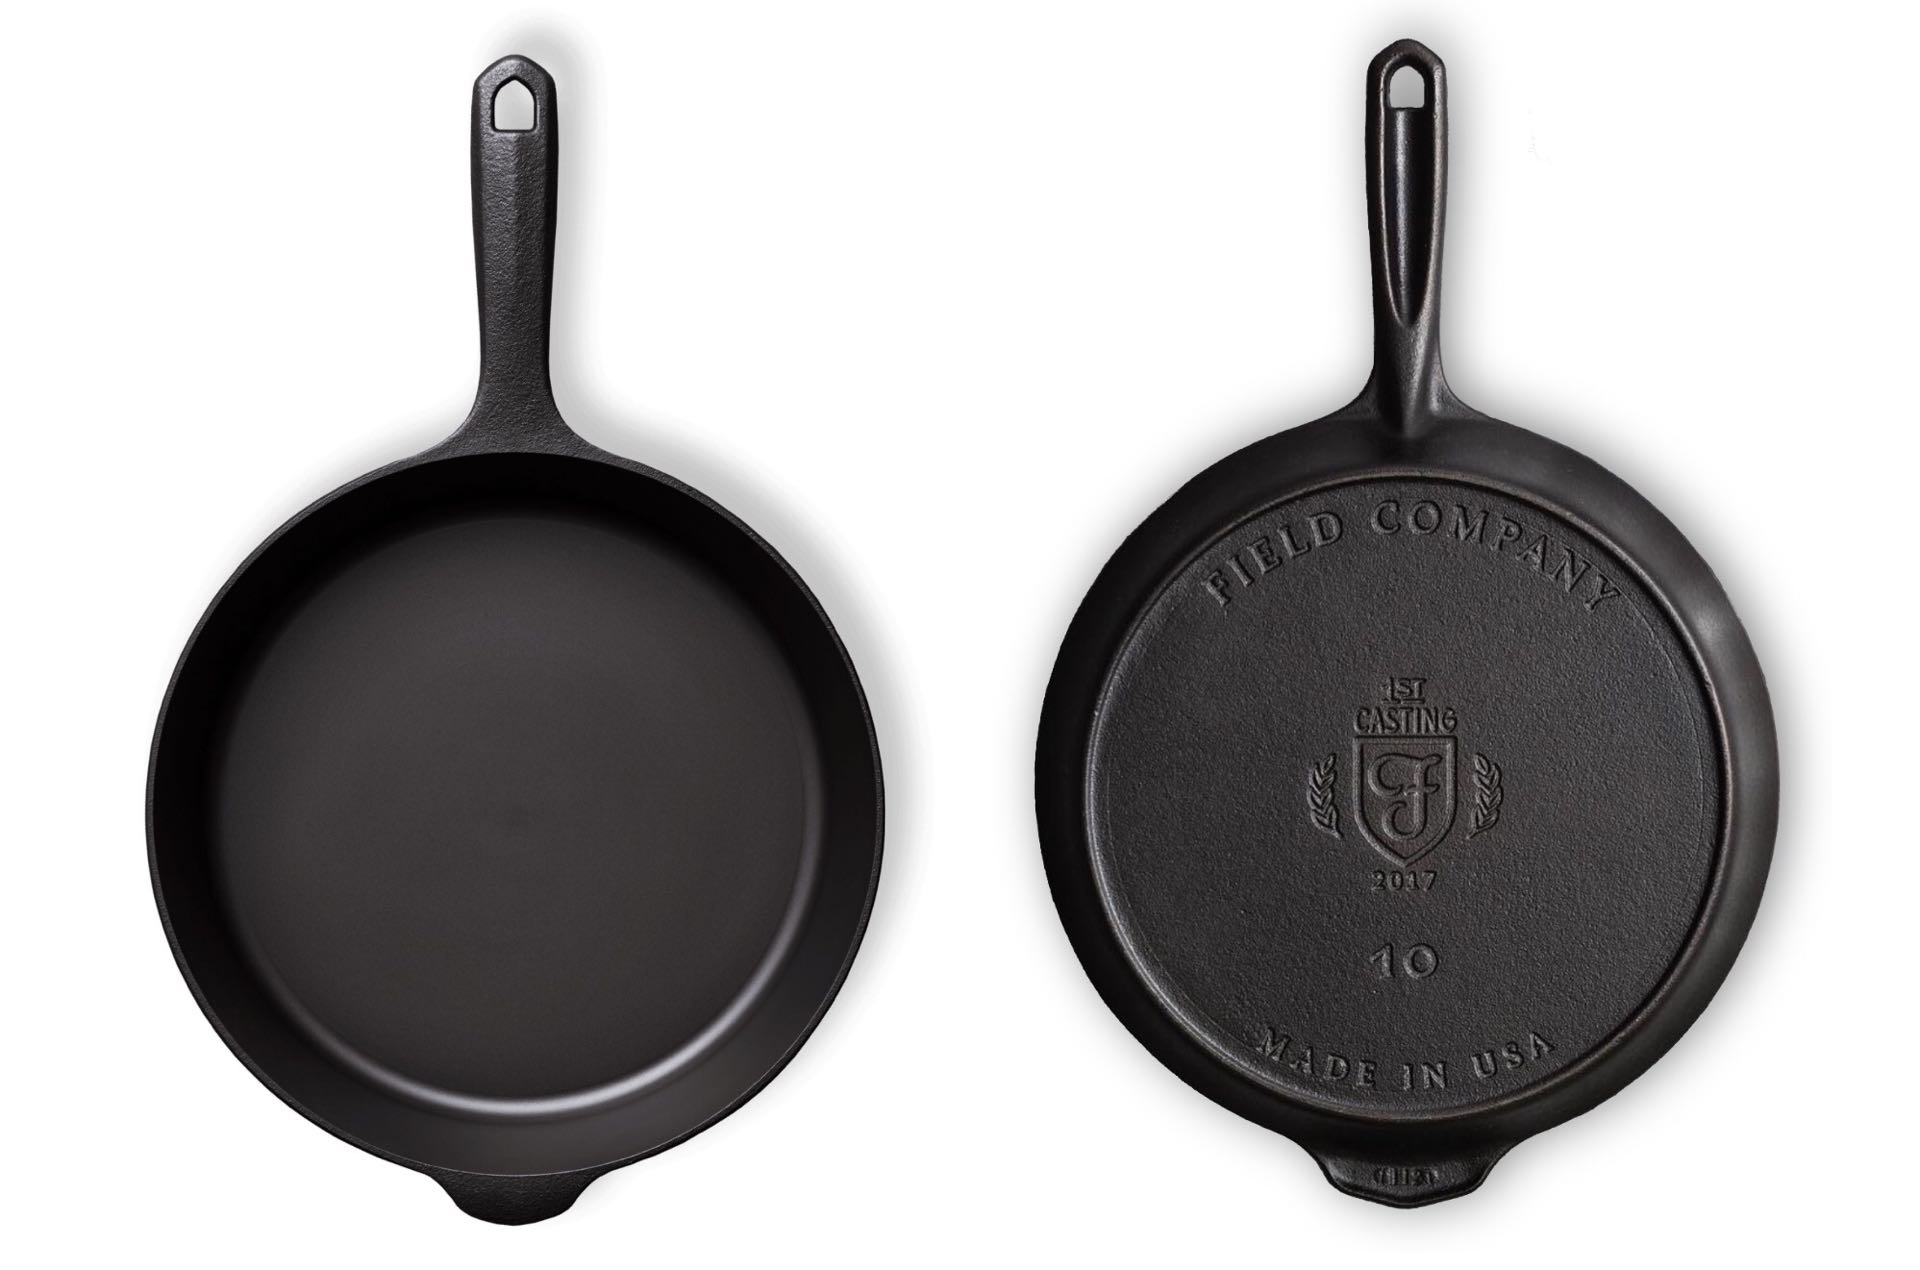 Field Company cast iron skillet. ($125 for № 8 size, $160 for № 10 size)